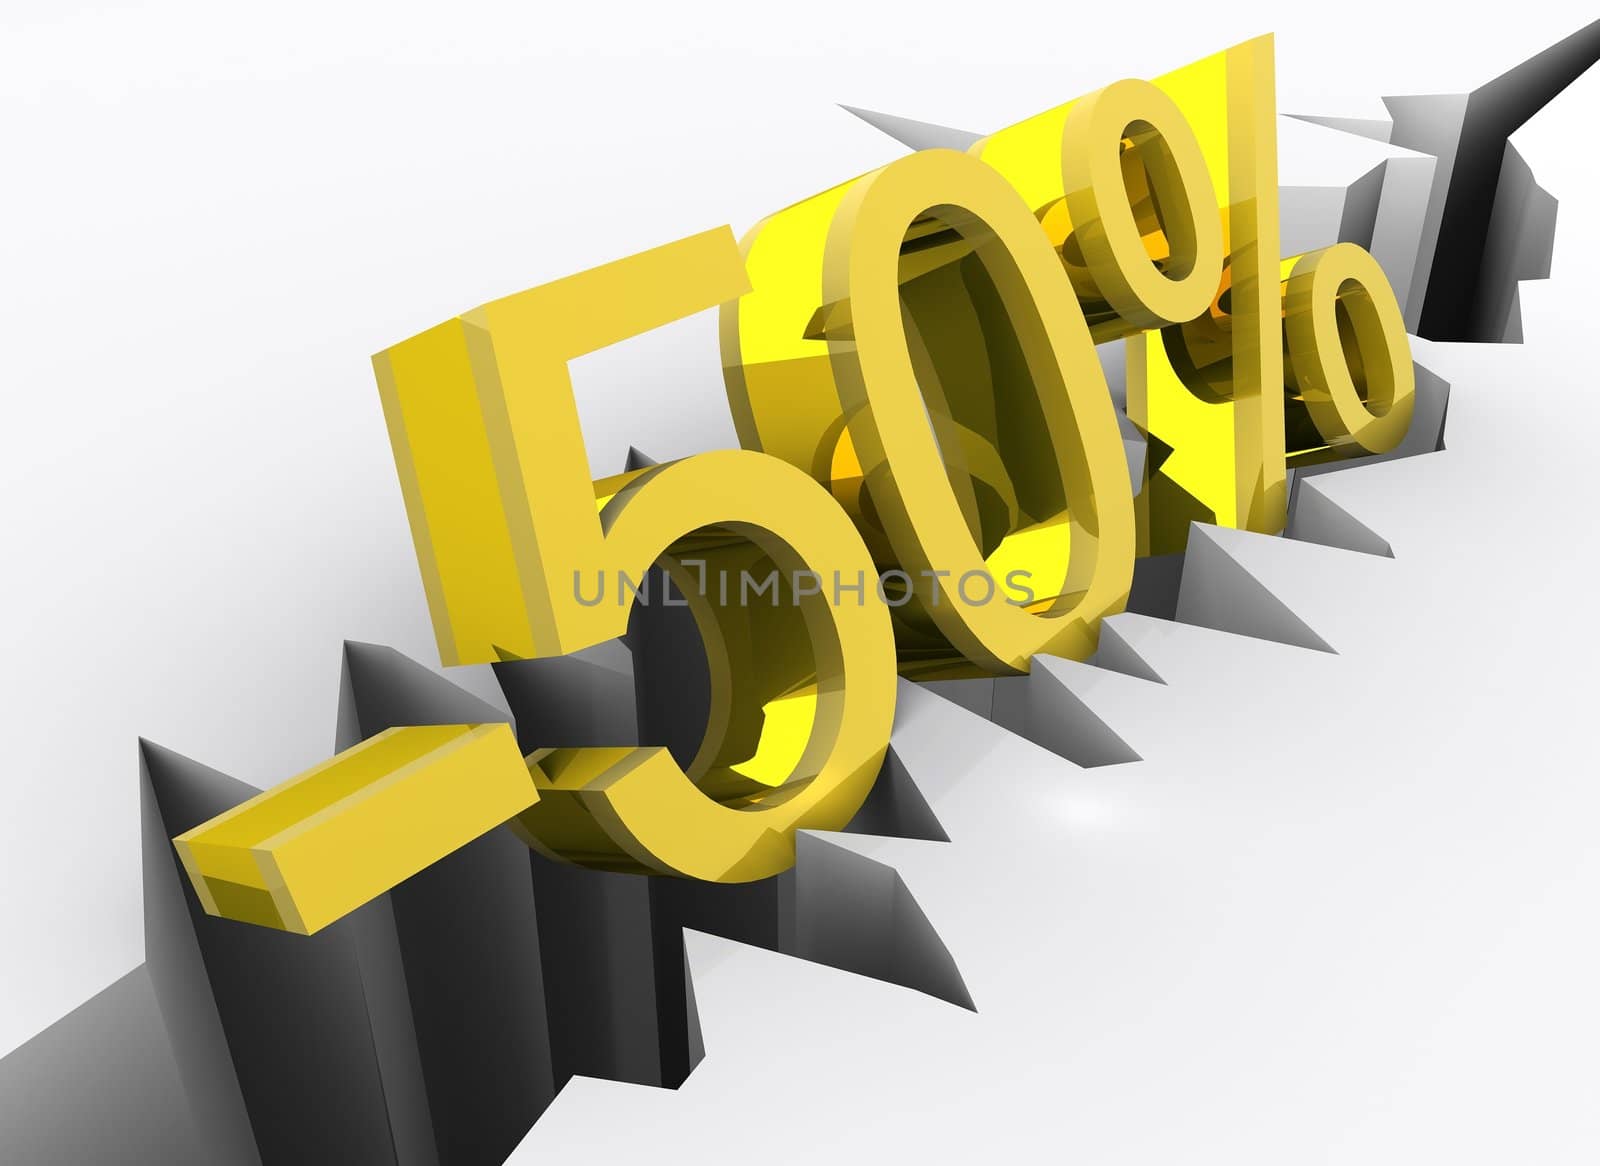 Concept of 50 percent discount portrayed by golden 3d number (minus fifty percent) rendered and isolated on white background with slight reflection in the ground.